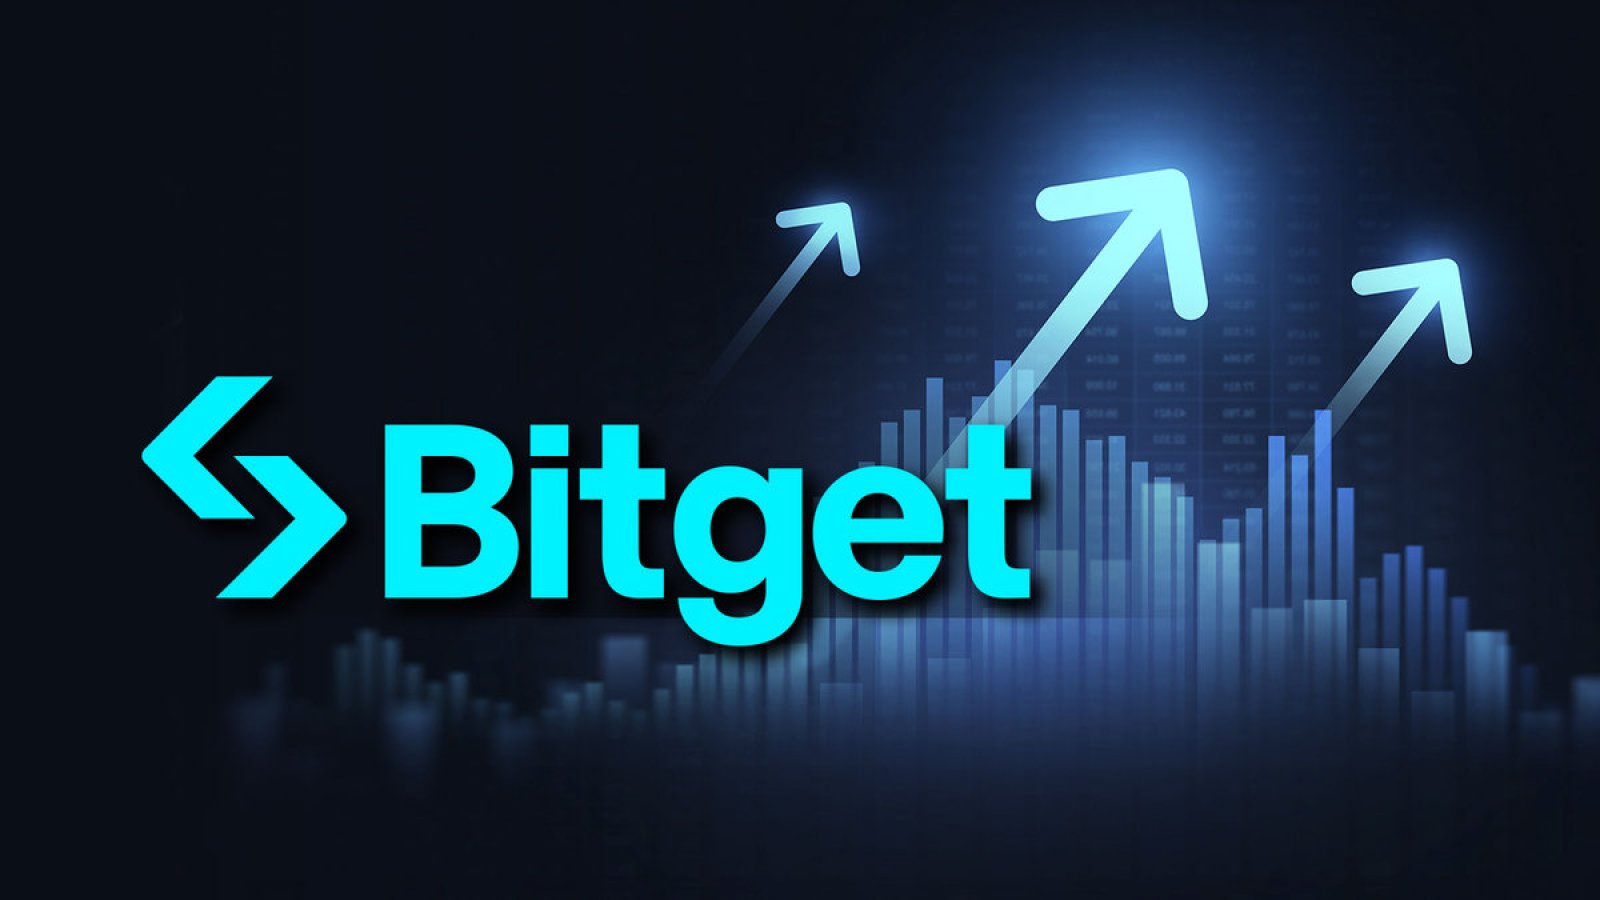 Bitget’s User Base Hits 25 Mln Users As The Bull Run Brings New Traders Into The Market